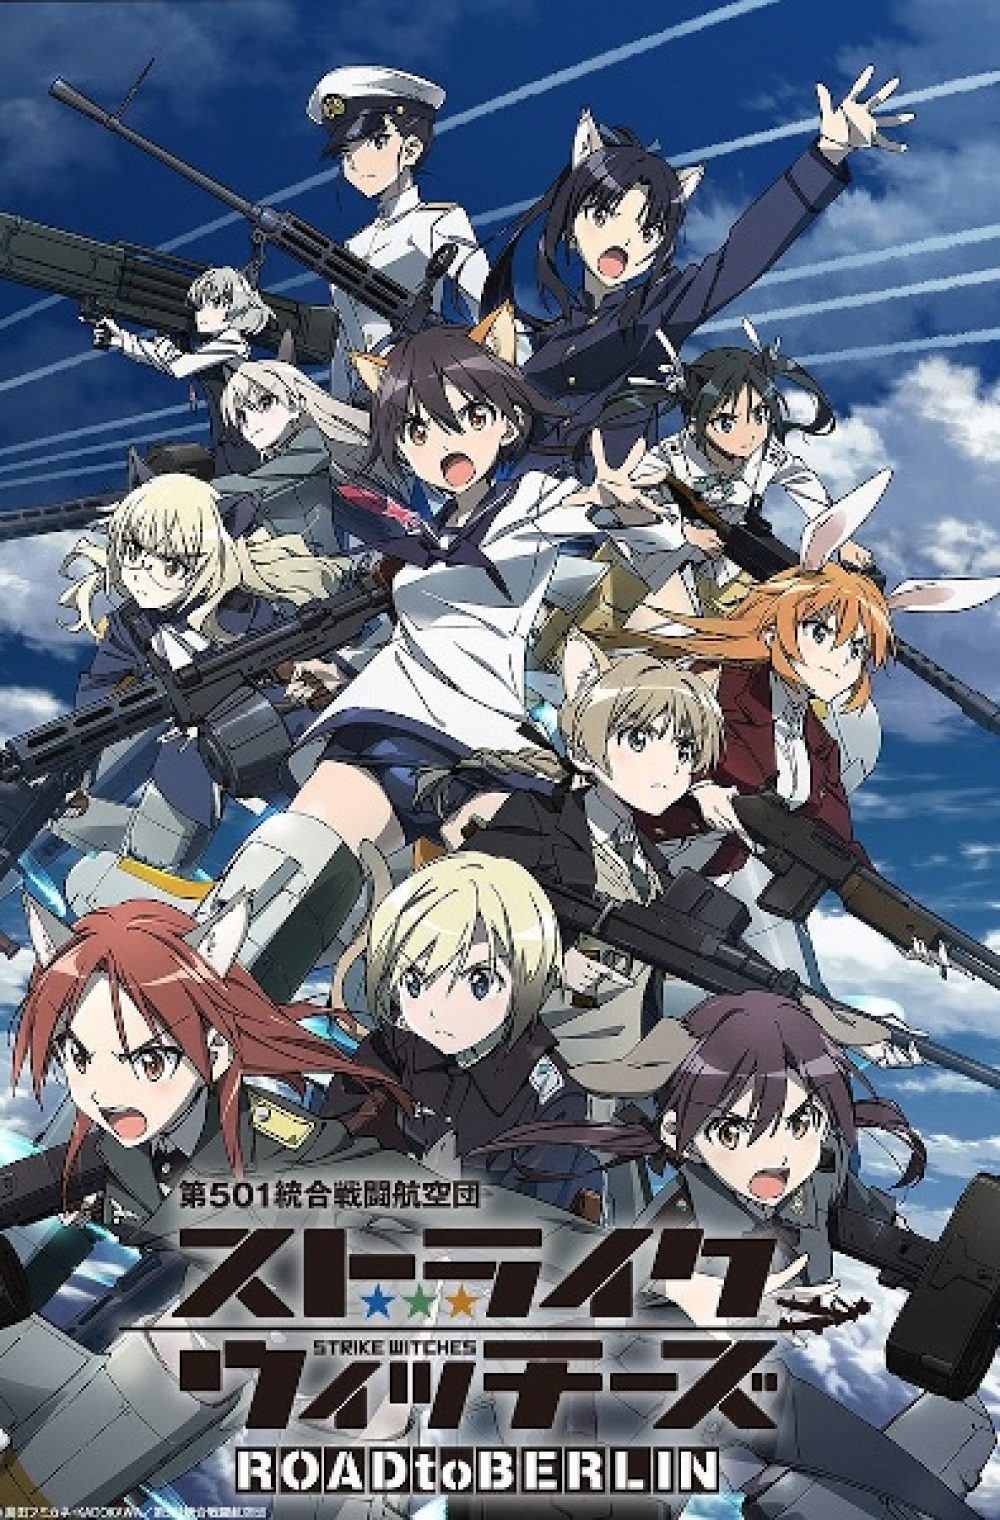 Strike Witches Season 3: ROAD to BERLIN